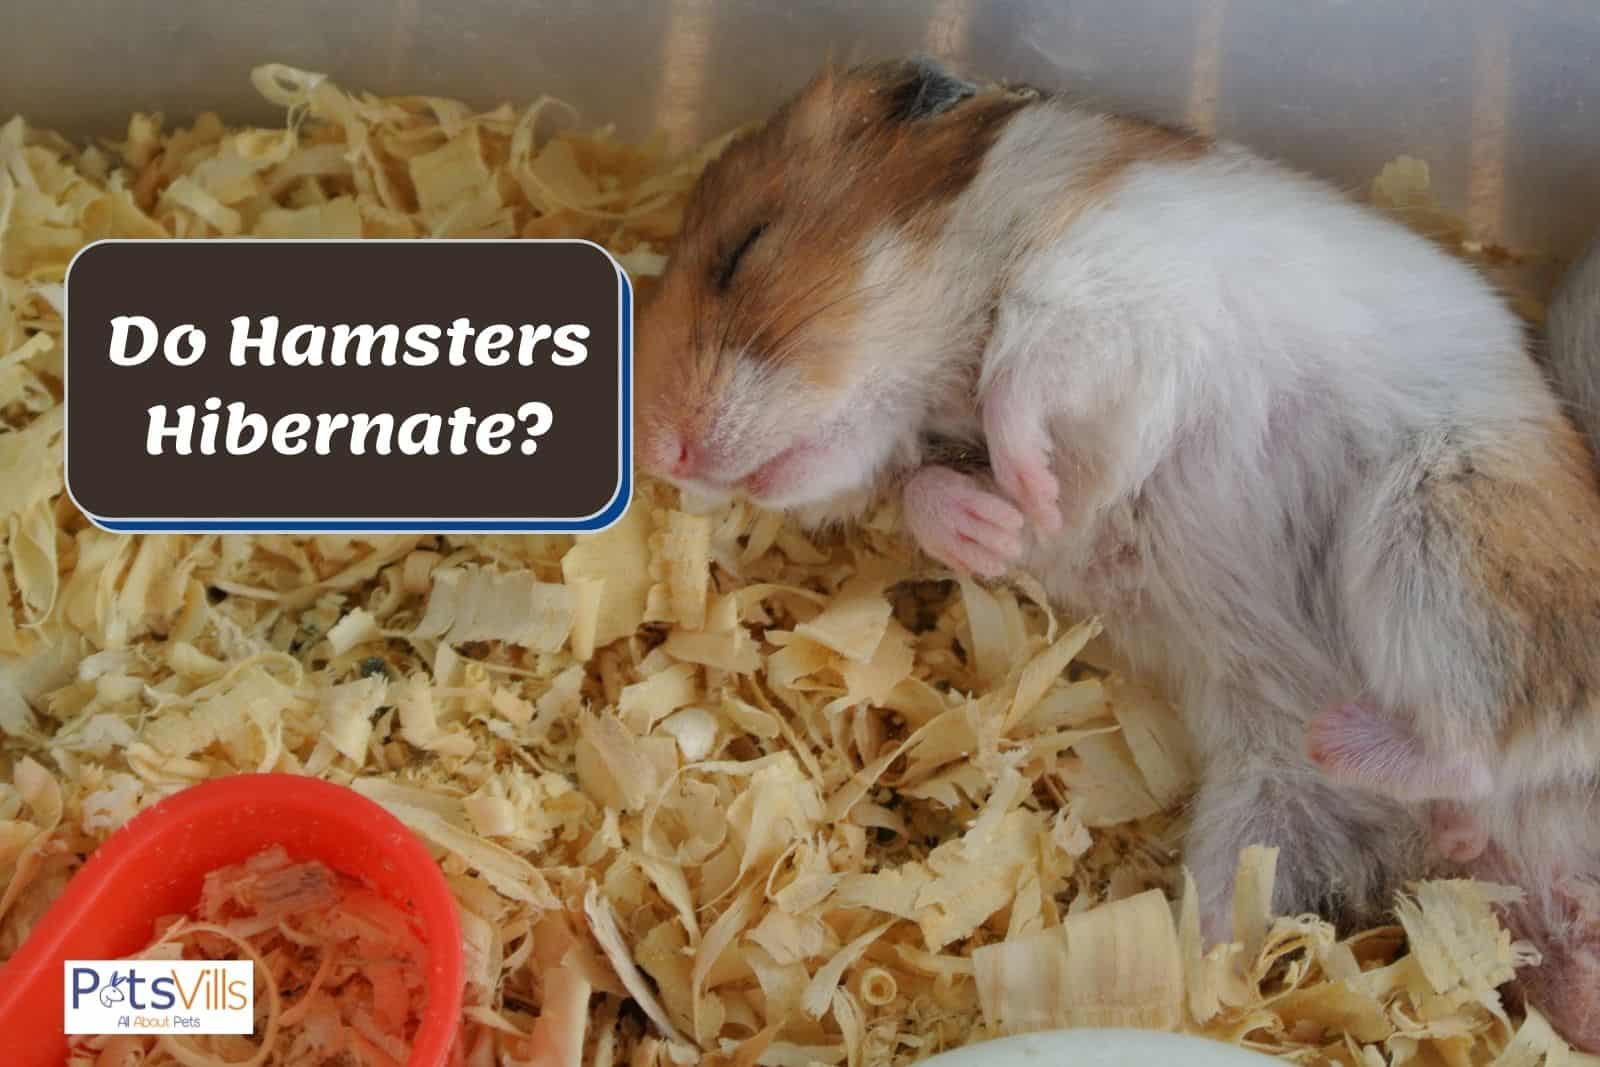 a hamster sleeping in a cage, how long do hamsters hibernate